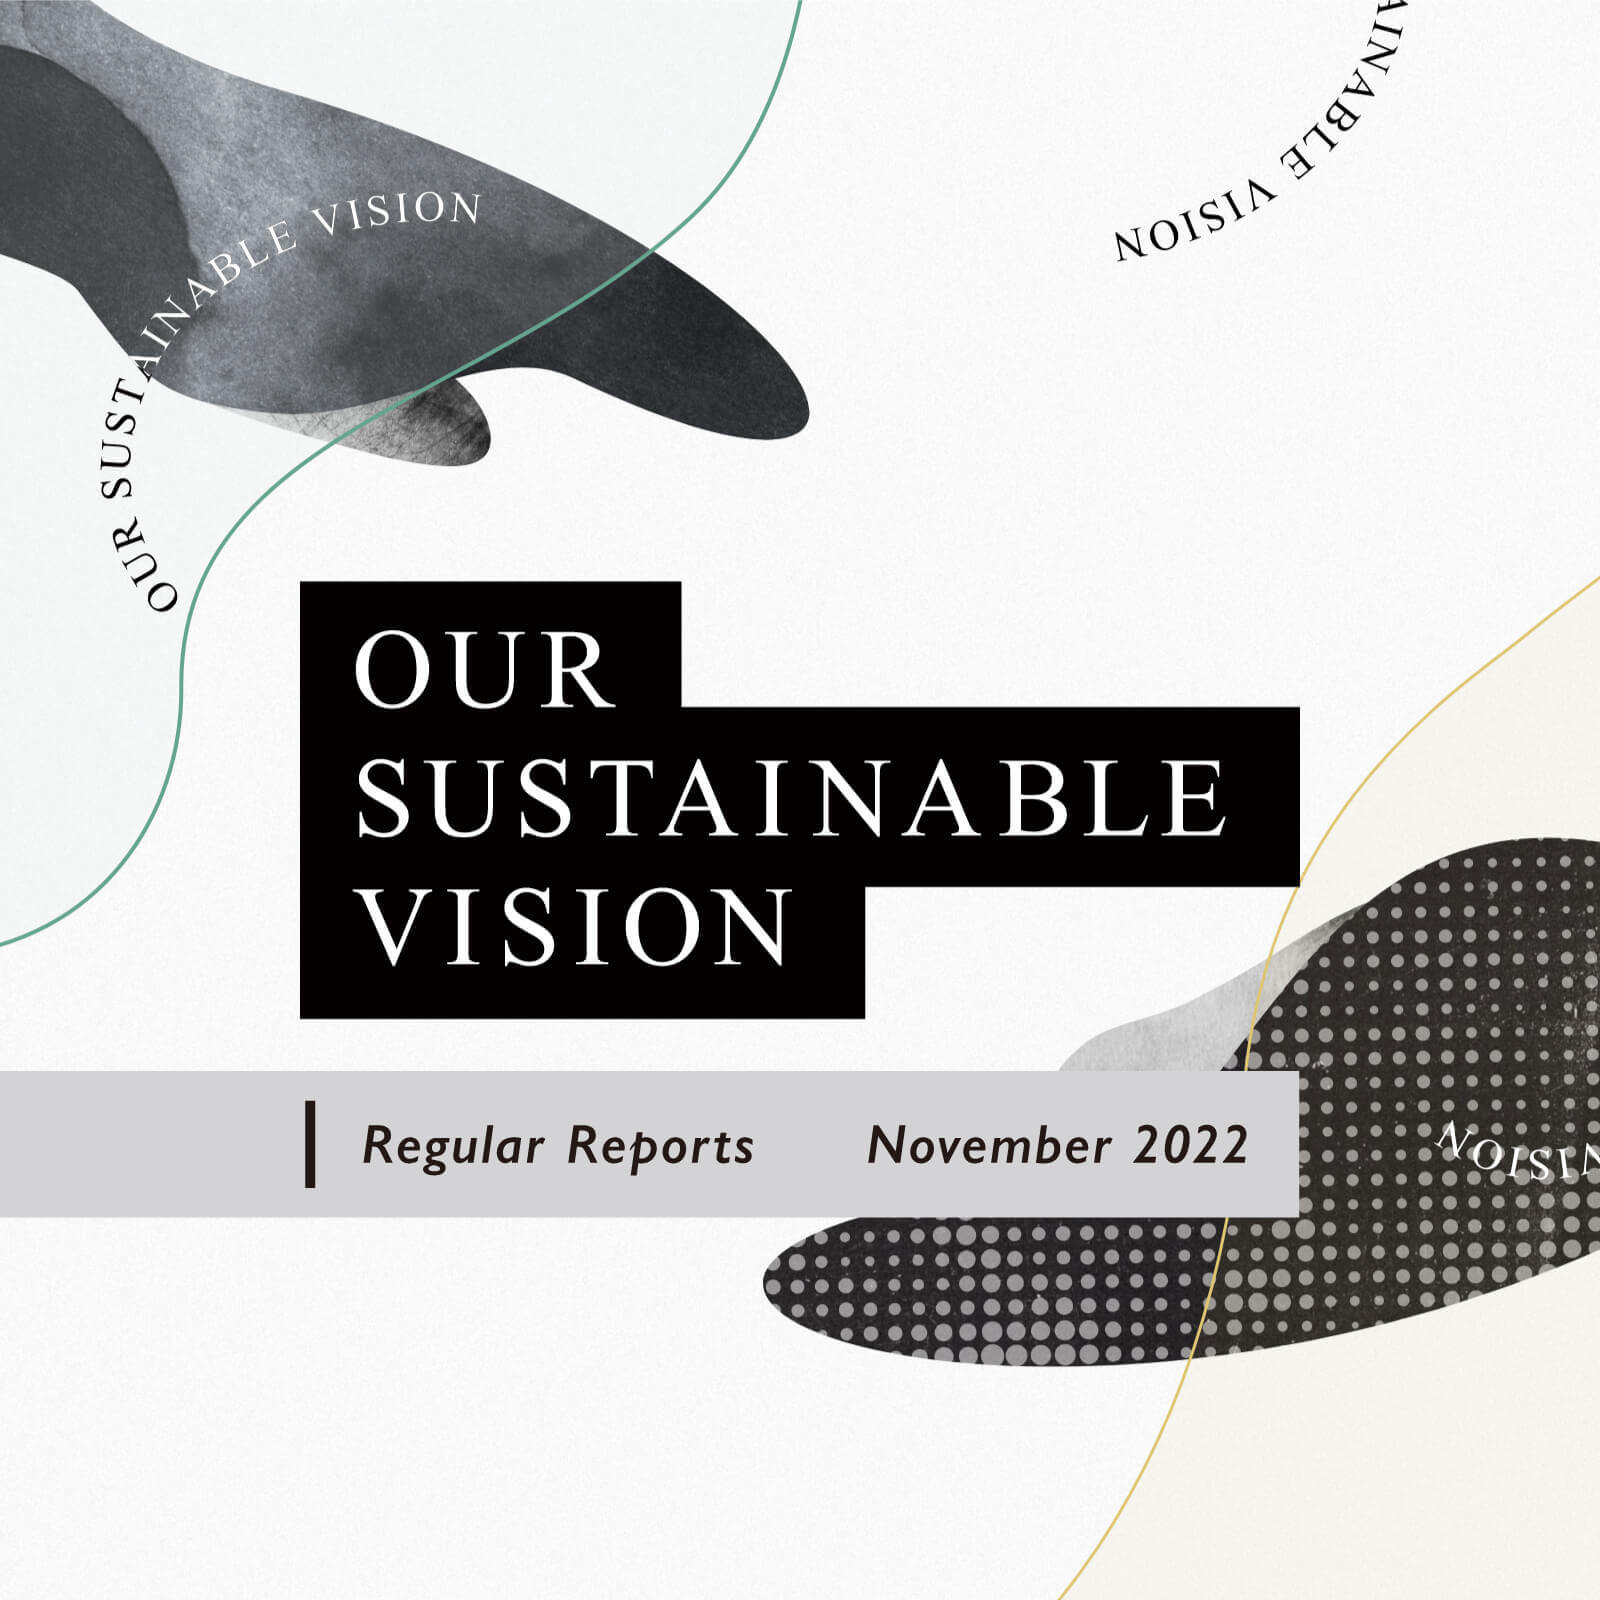 【OUR SUSTAINABLE VISION】Monthly Report_November 2022 11.29(TUE.)